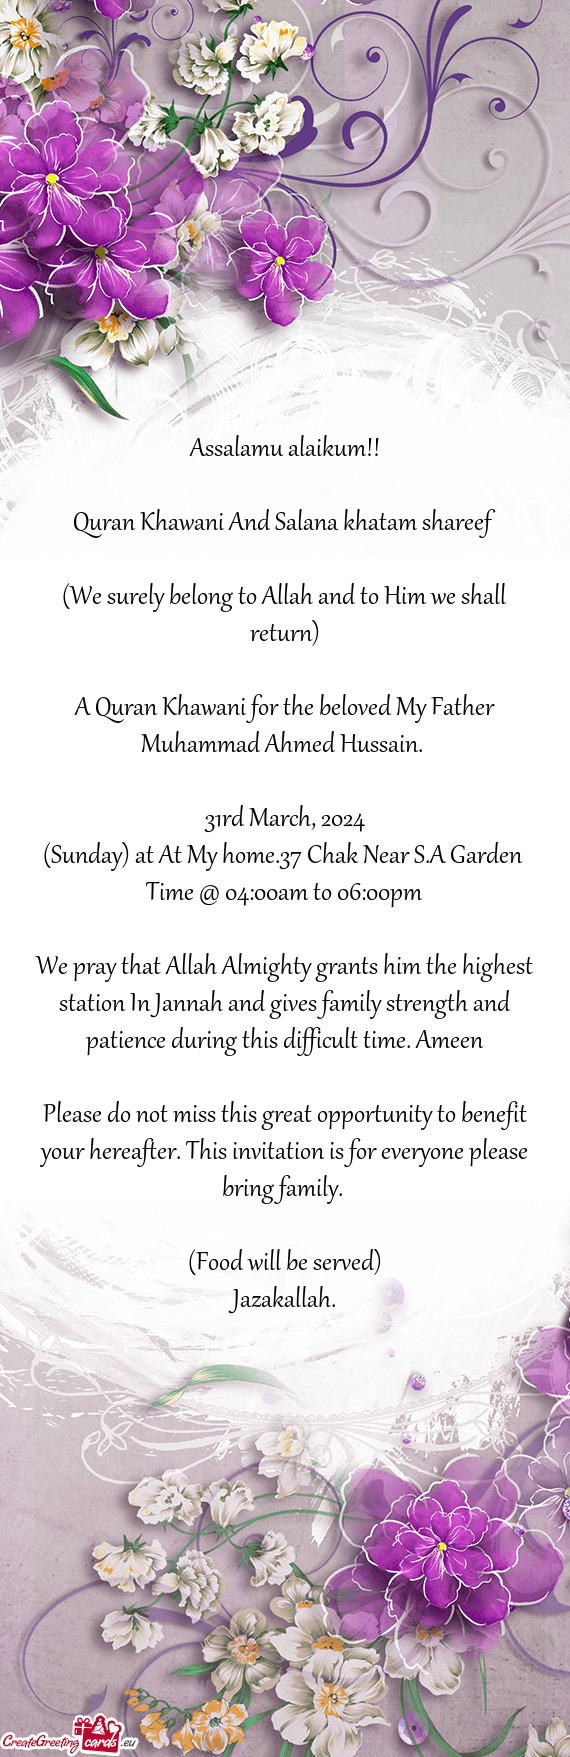 A Quran Khawani for the beloved My Father Muhammad Ahmed Hussain